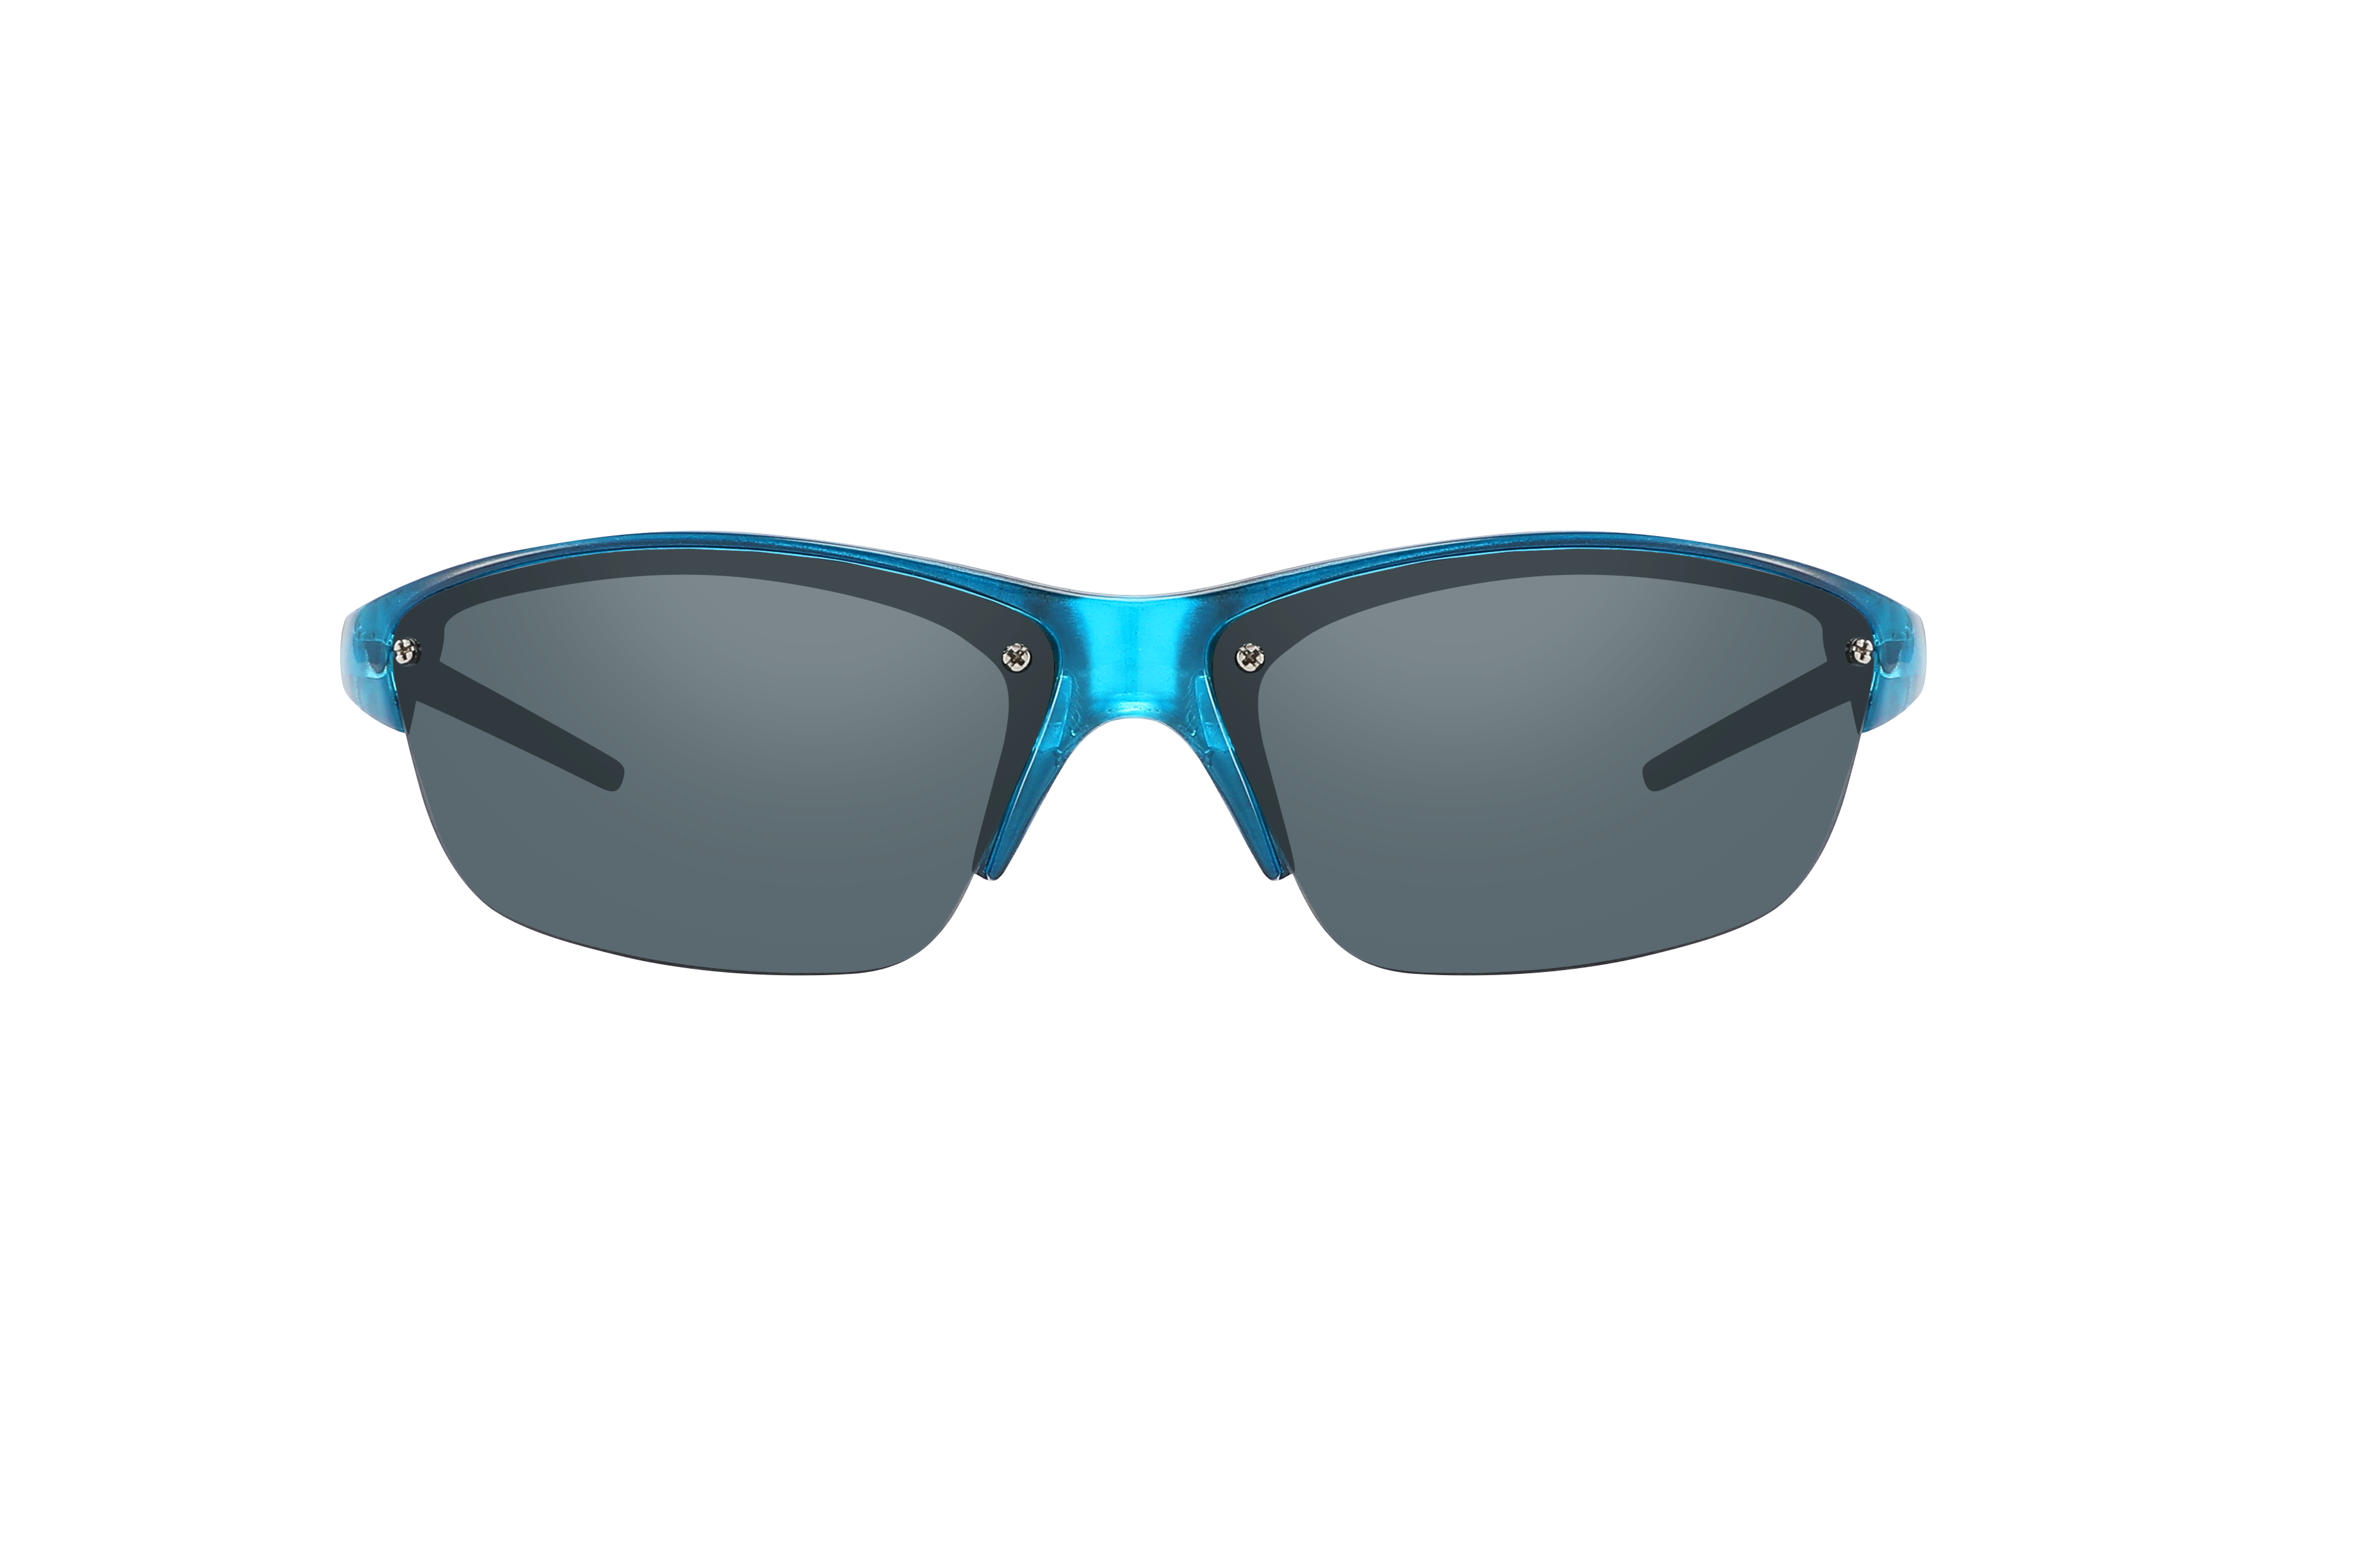 Sports Sunglasses,color Optional,uv 400 Lens, Fashionable Style, Any  Pantone Colors Are Availabe, Ce,fda Approved，oem Availabe - Expore China  Wholesale Sunglasses and Half-frame Sunglasses, Unisex Sunglasses, Sports  Sunglasses